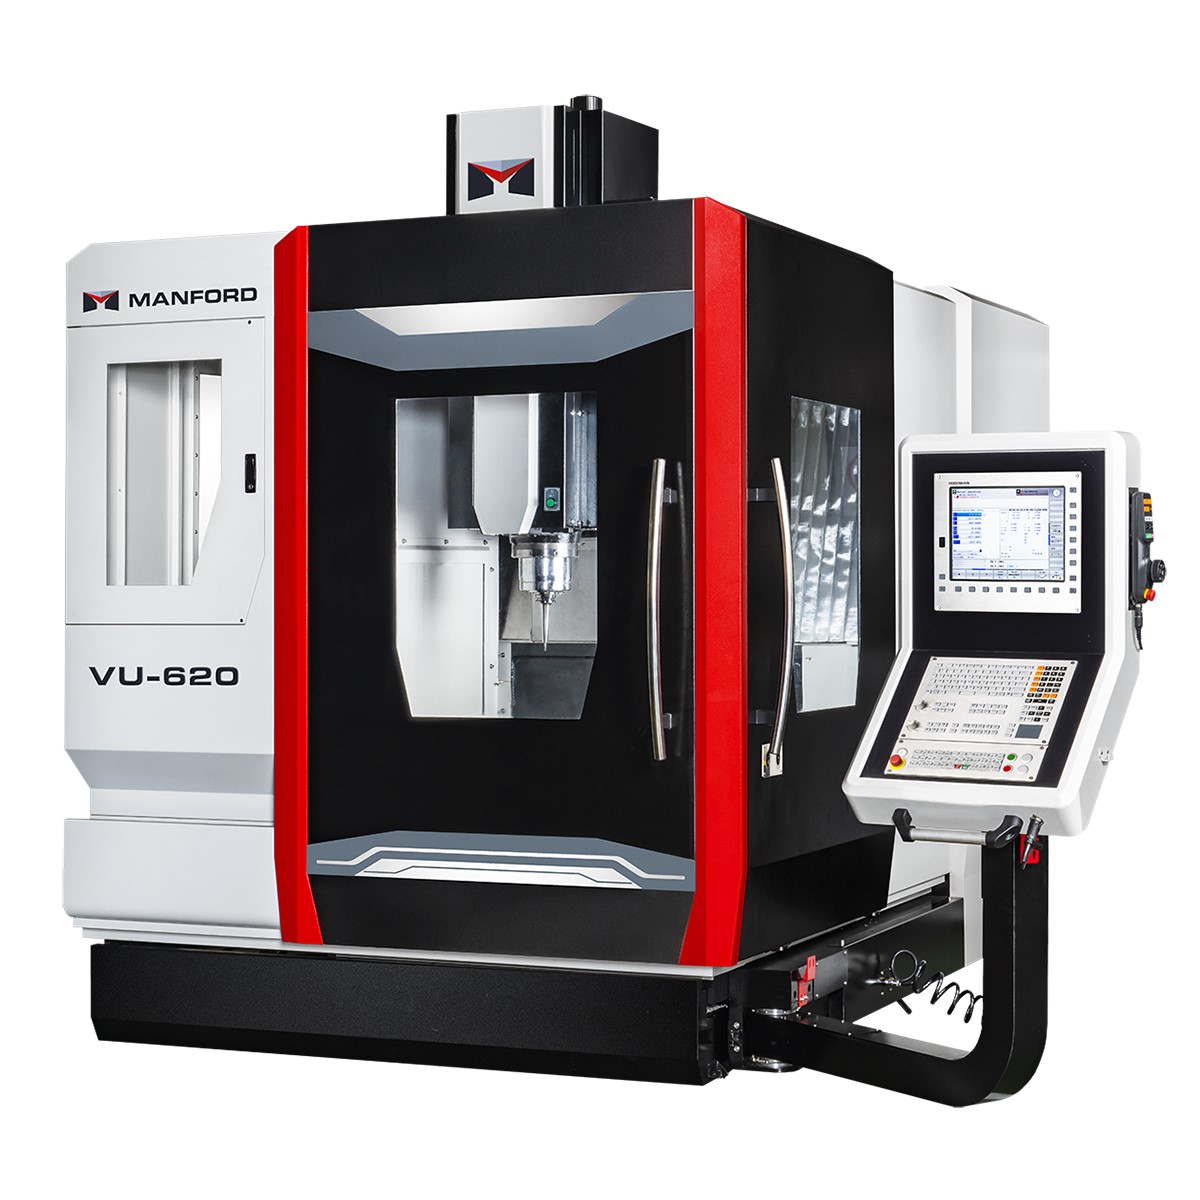 Products|5 AXIS MACHINING CENTER